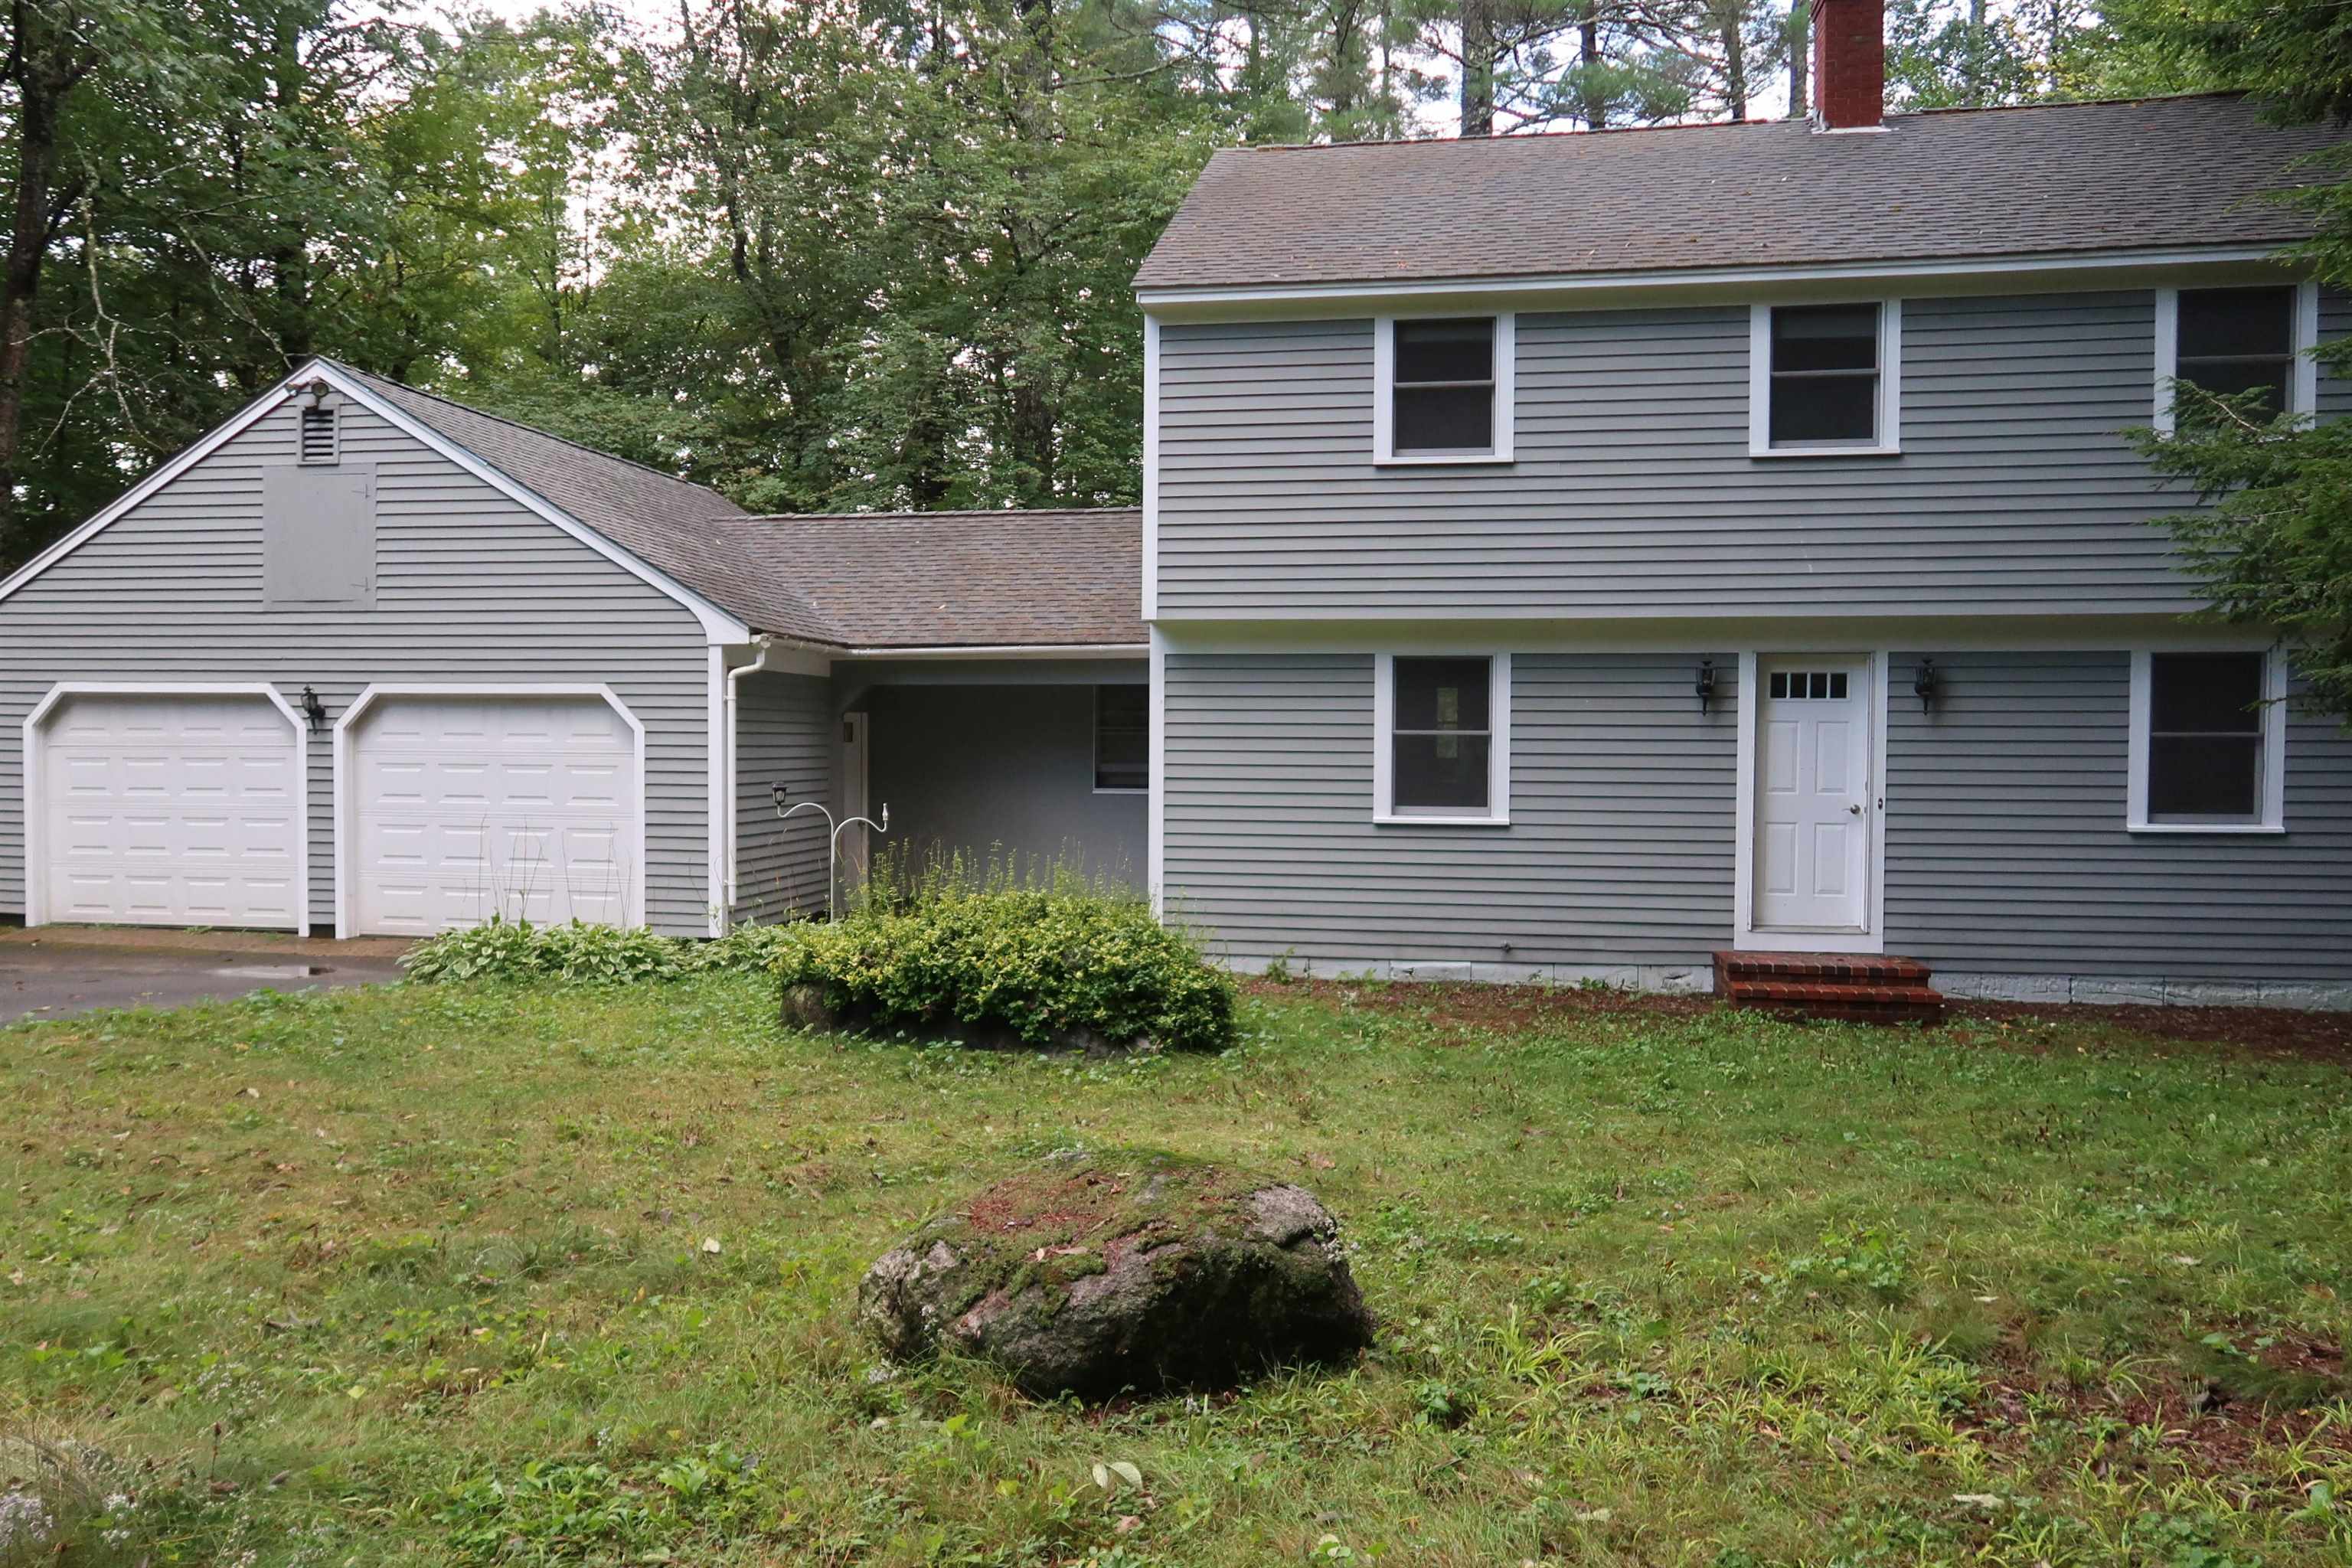 HEBRON NH Homes for sale